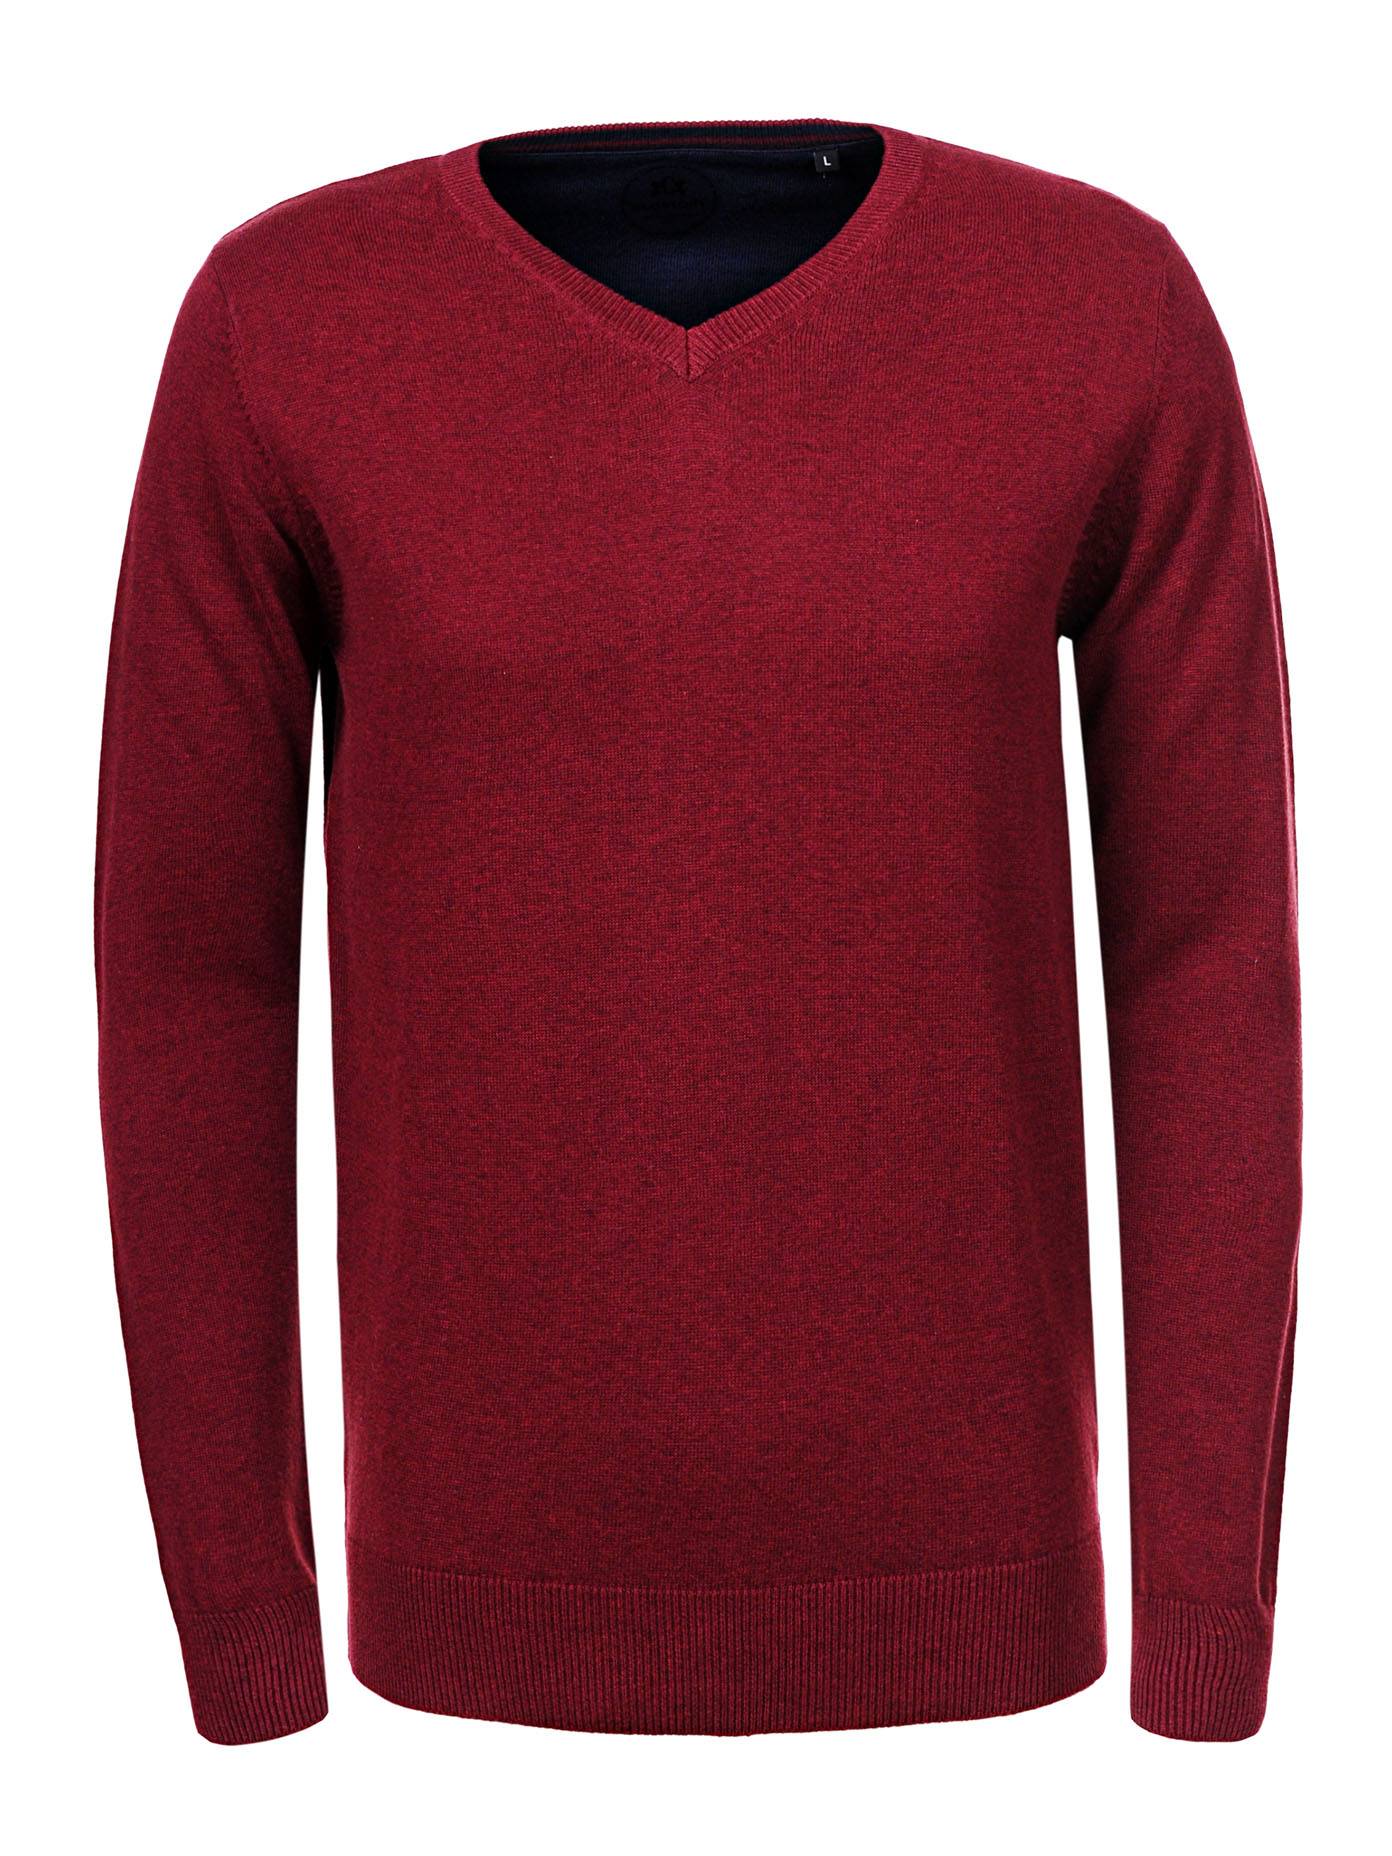 Plus size Men's Knitted Long Sleeve Sweater